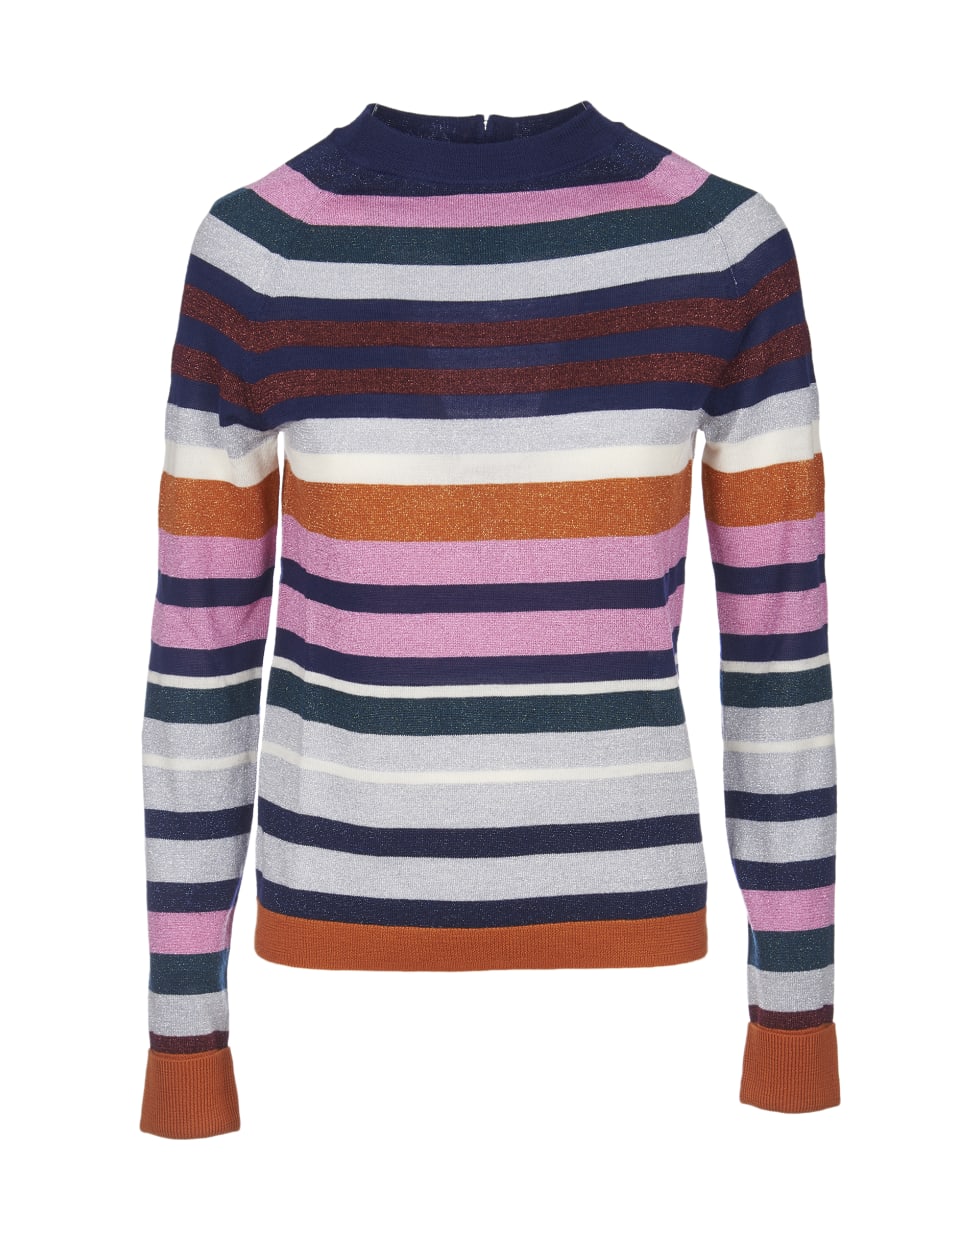 PS by Paul Smith Sweater - Bordeaux